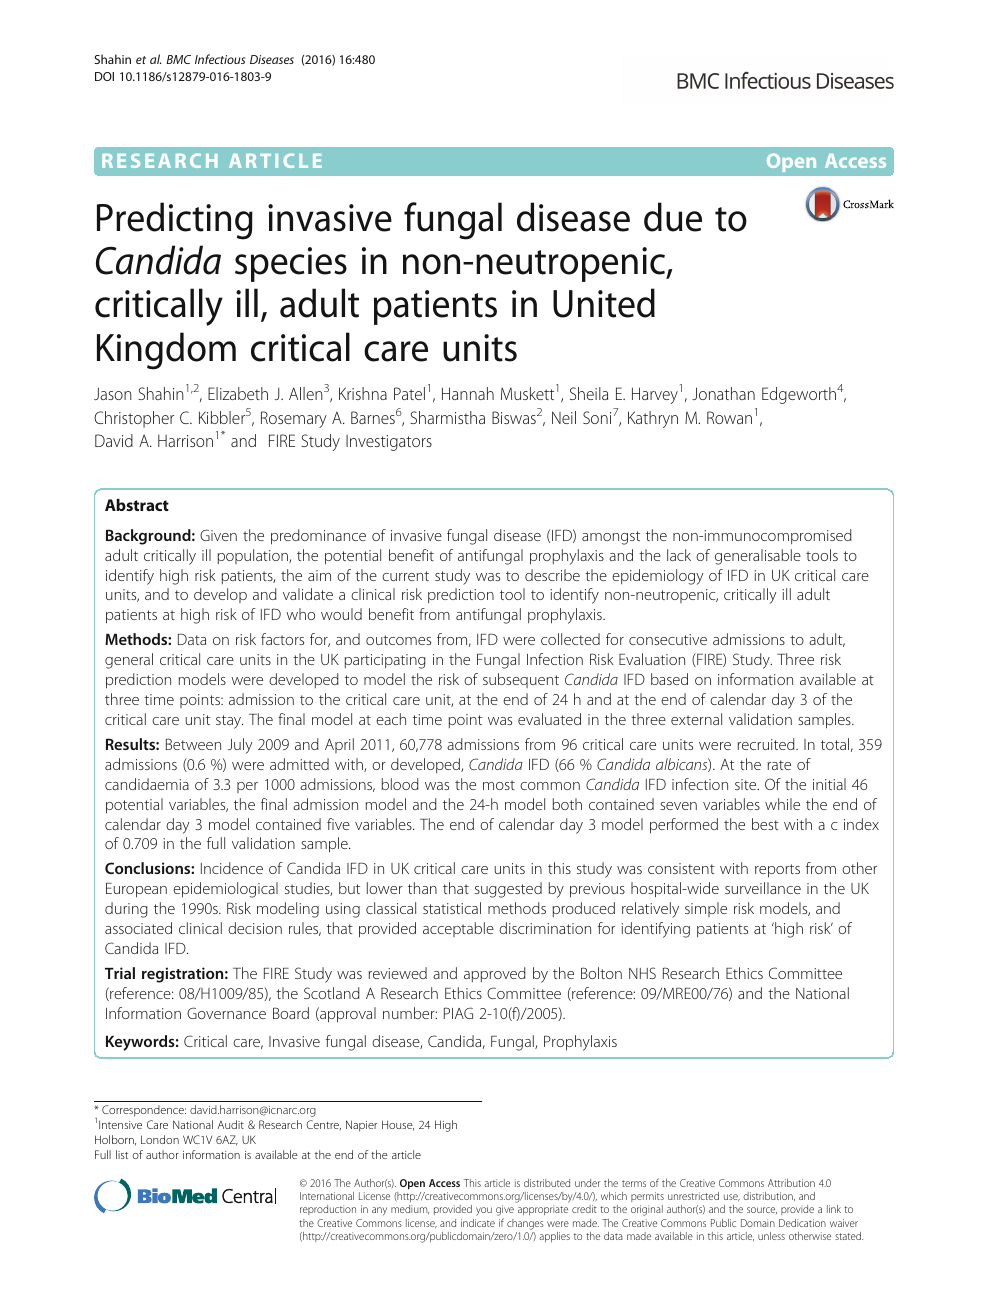 Predicting Invasive Fungal Disease Due To Candida Species In Non Neutropenic Critically Ill Adult Patients In United Kingdom Critical Care Units Topic Of Research Paper In Health Sciences Download Scholarly Article Pdf